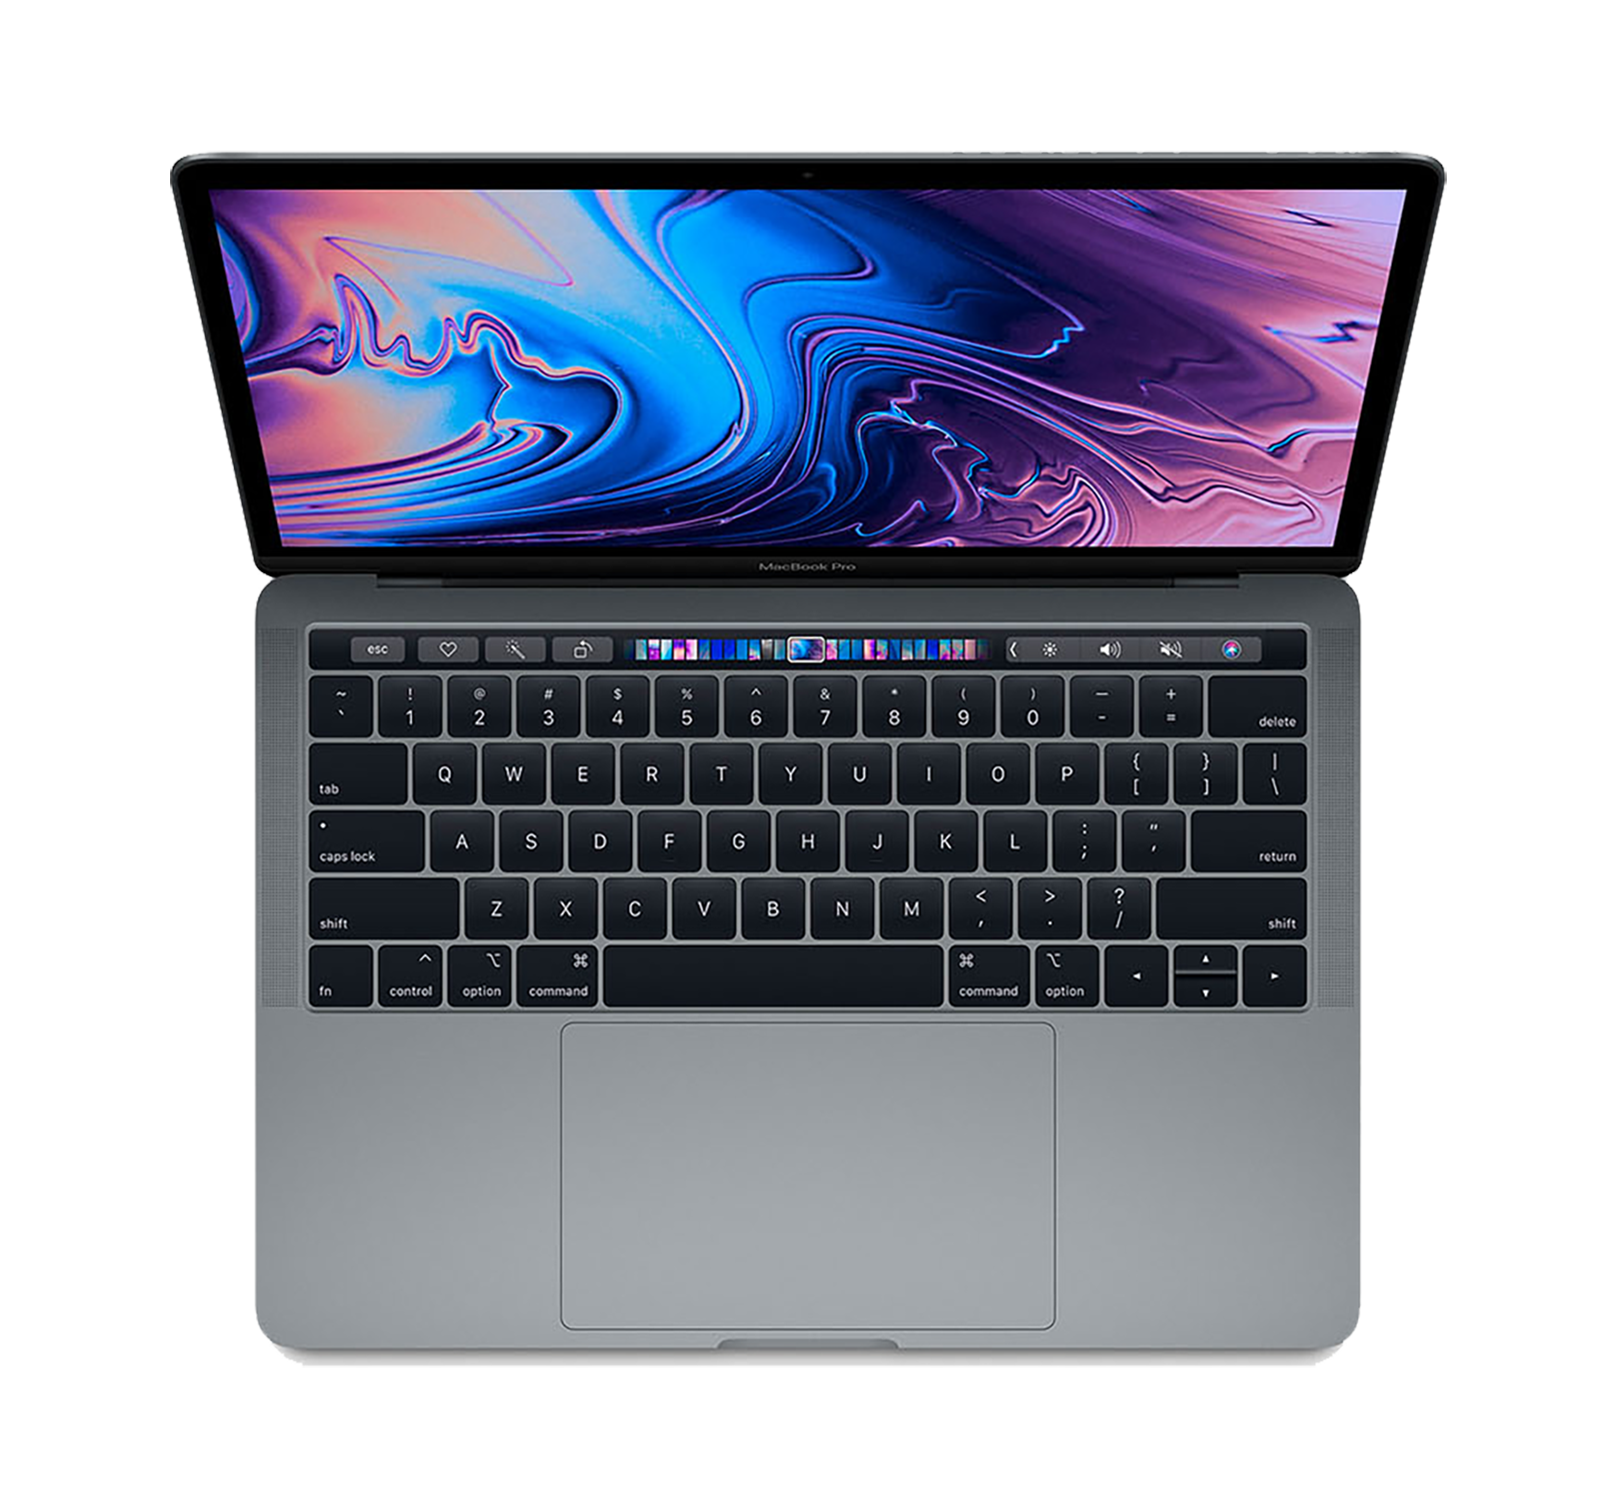 Apple MacBook Pro 13 Inch Price Guide MUHP2LL/A - Coupons, Deals